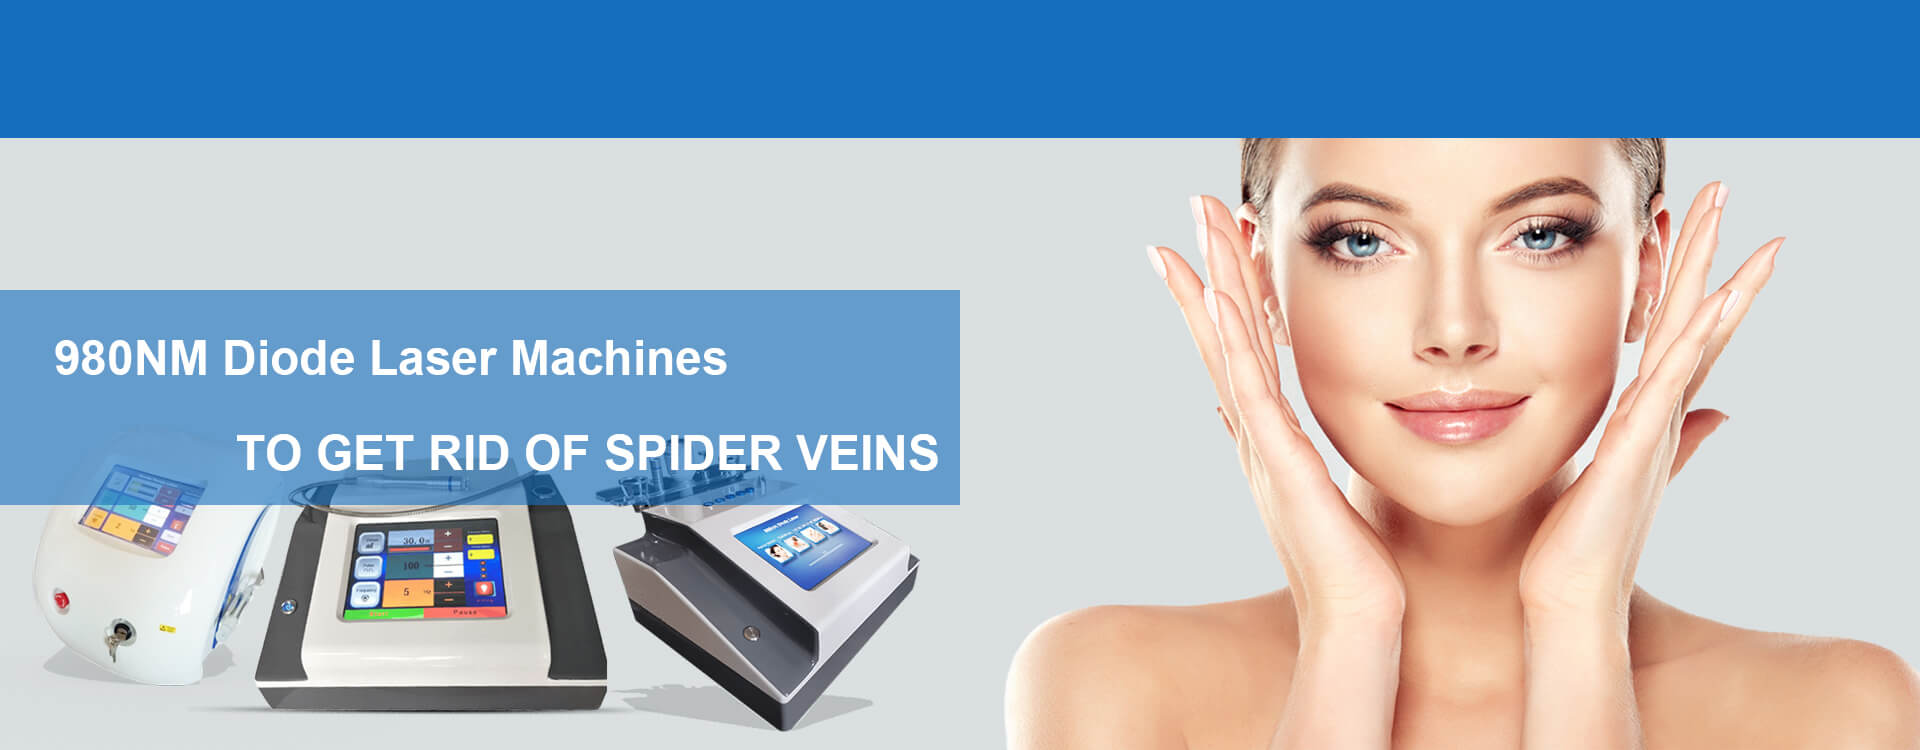 How To Get Rid Of Spider Veins On Face?